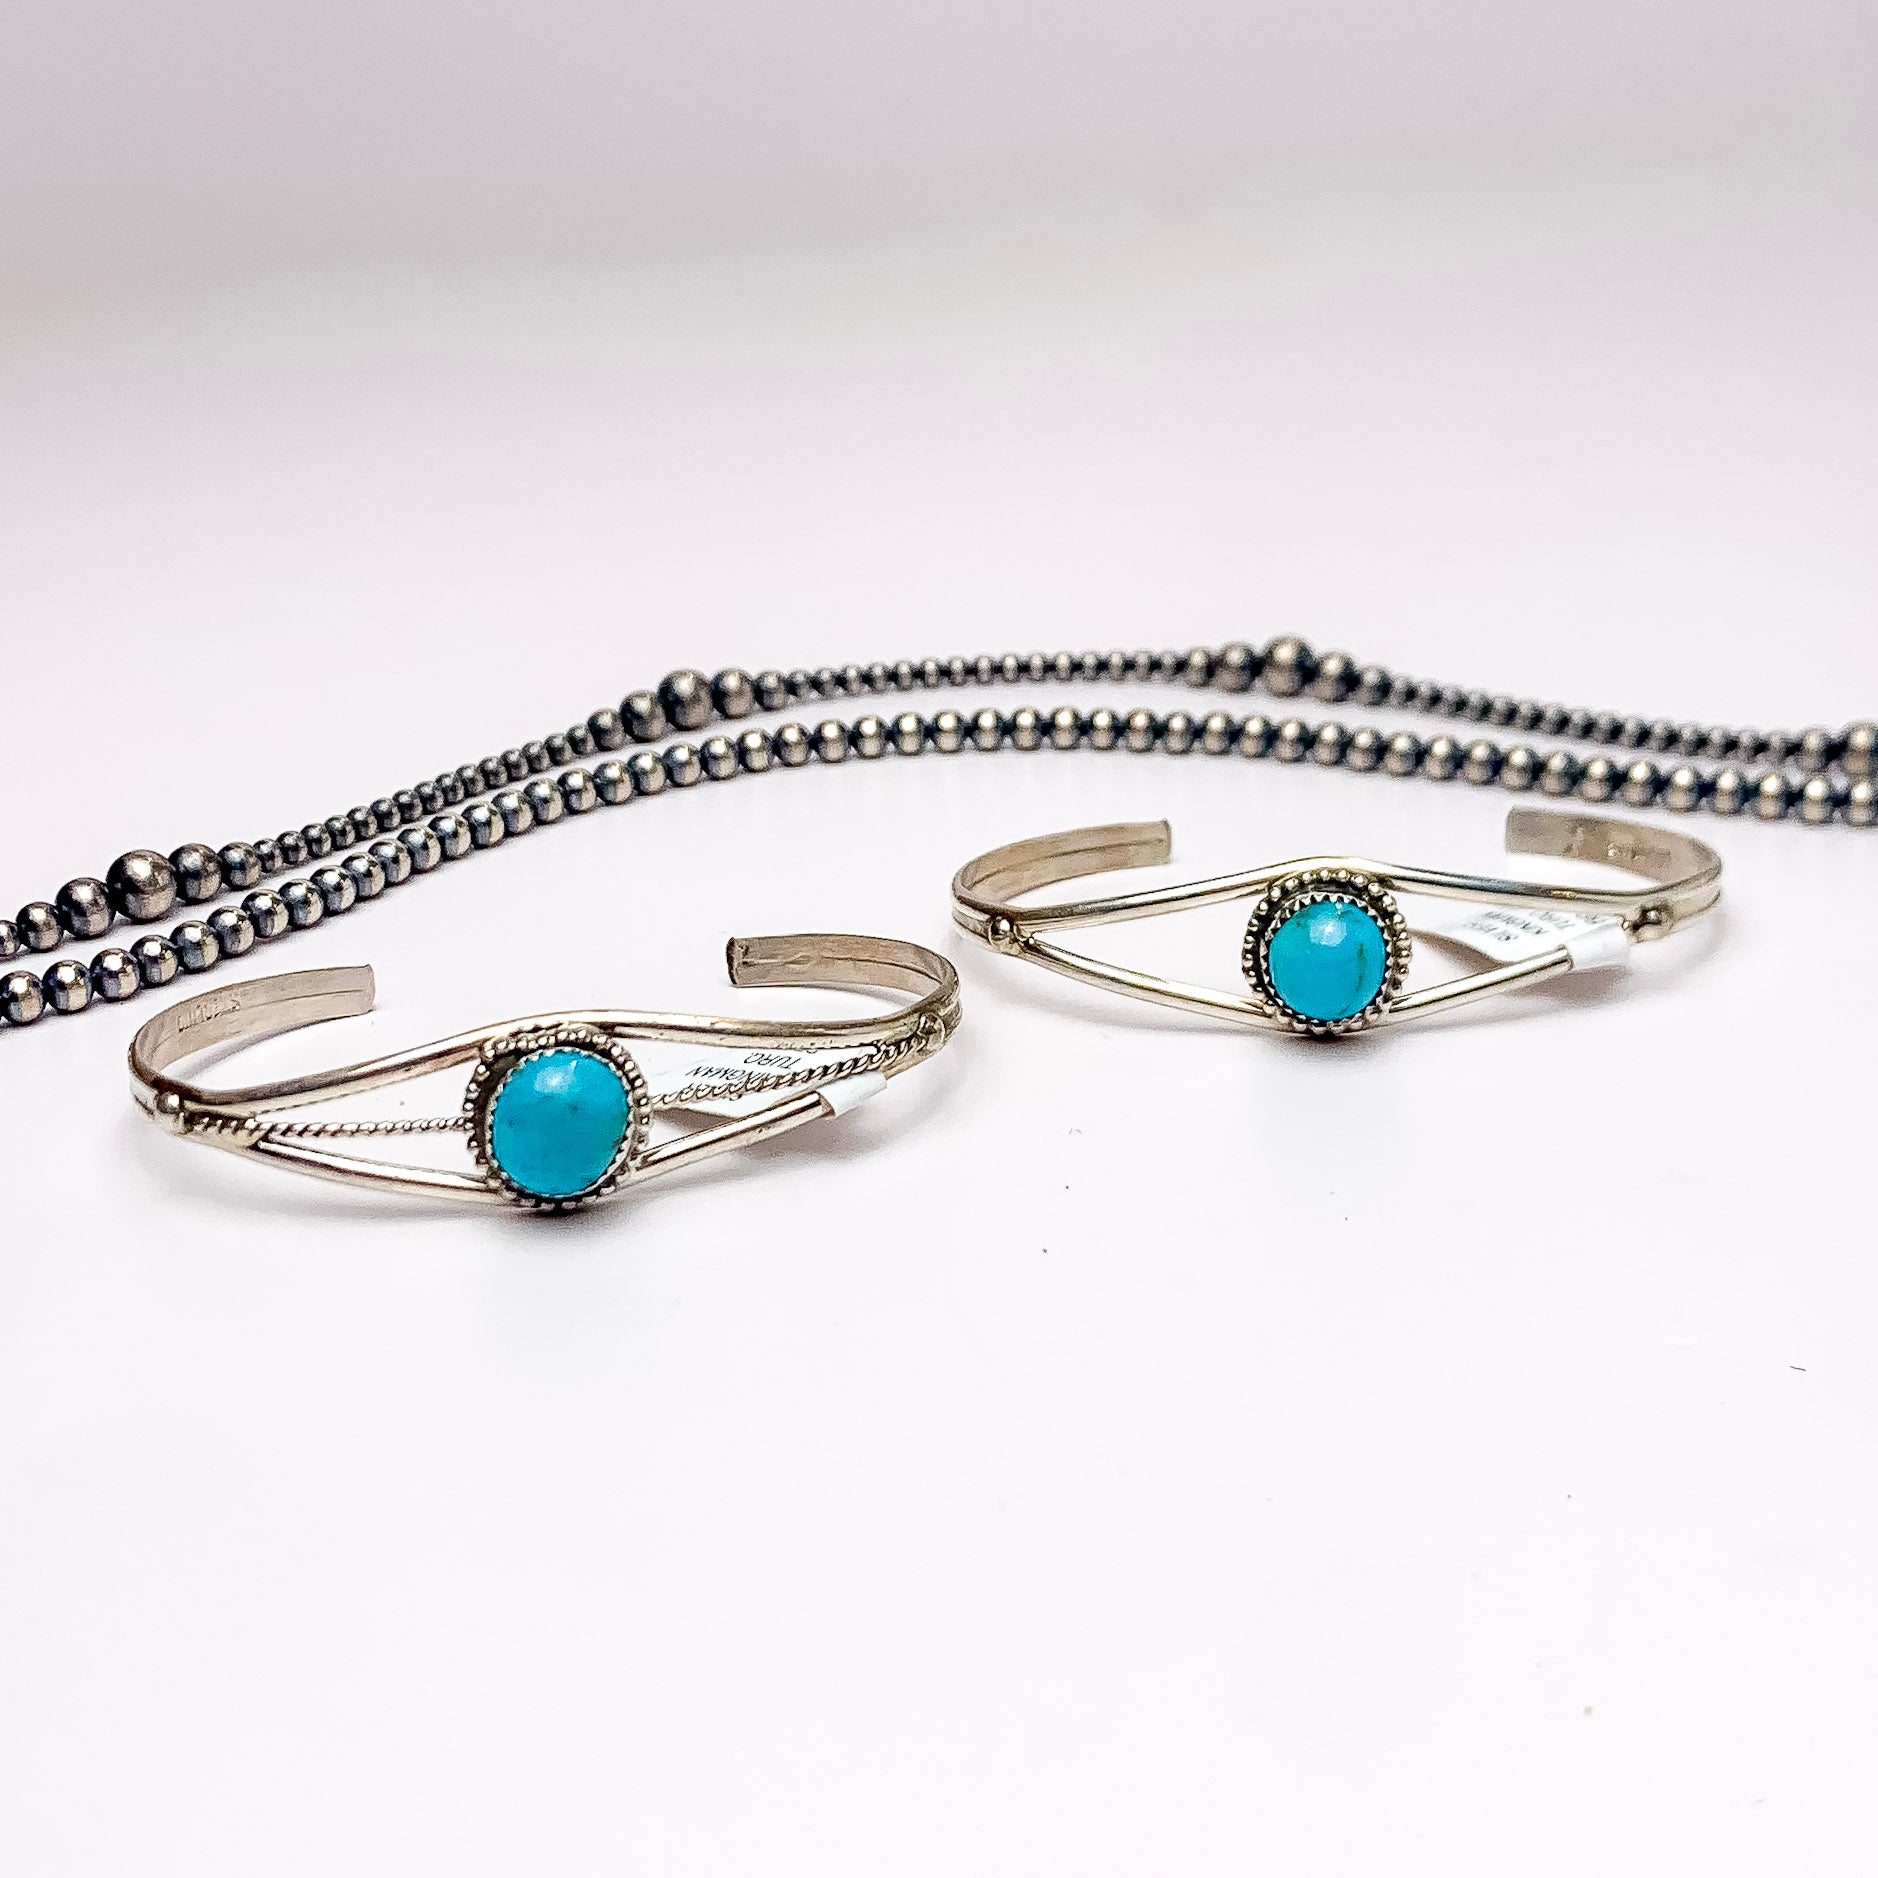 In the picture is a sterling silver cuff bracelet with a turquoise center stone with a white background